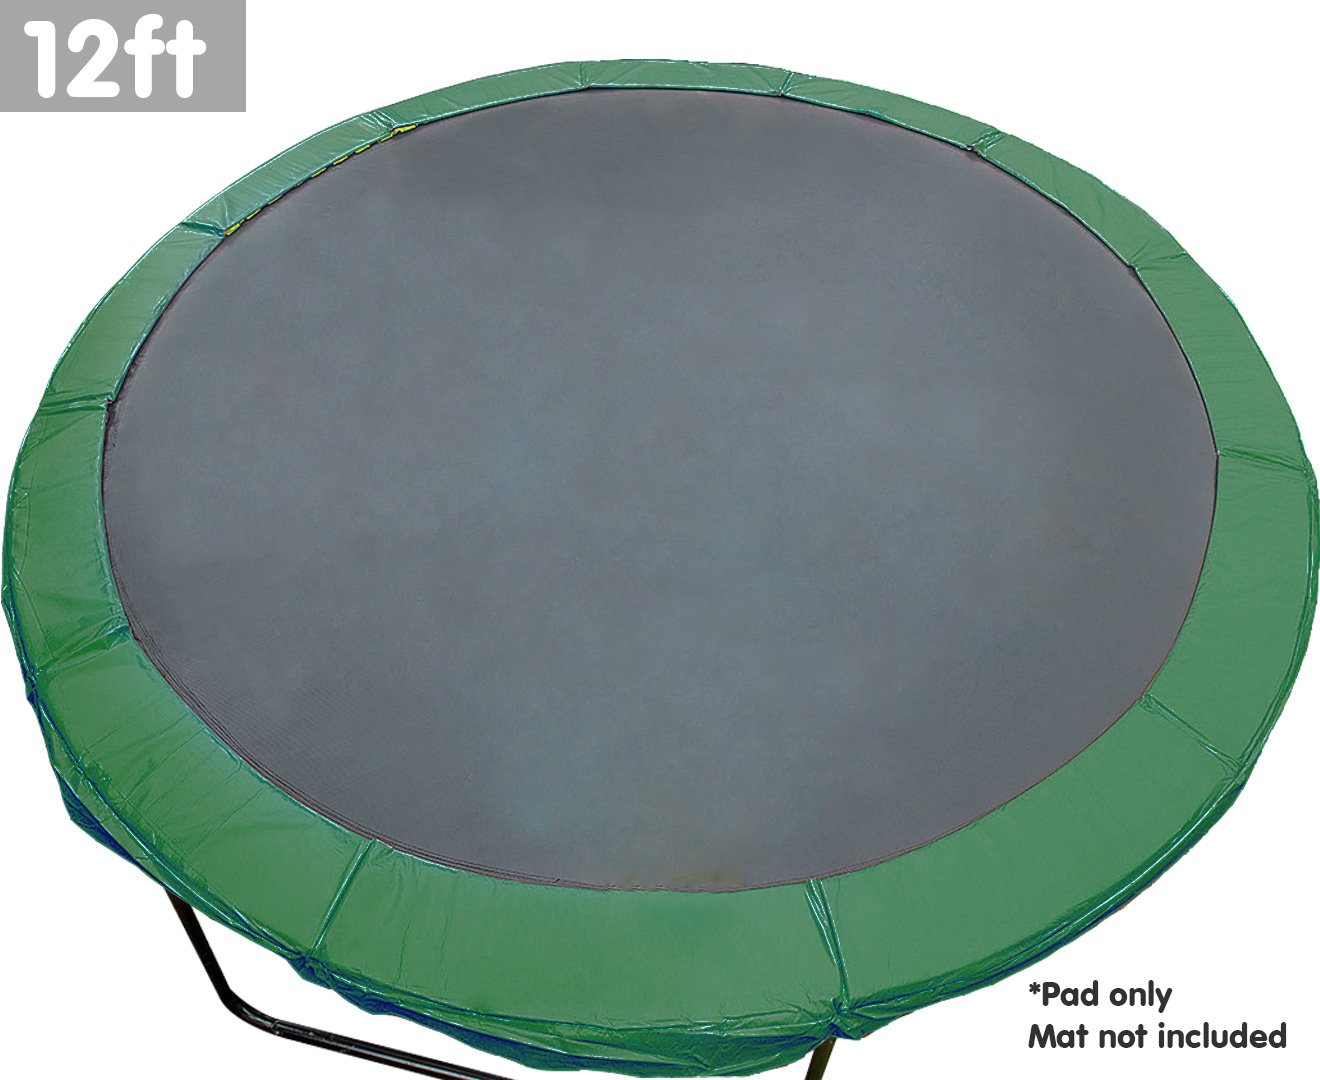 Trampoline 12ft Replacement Reinforced Outdoor Pad Cover - Green 2